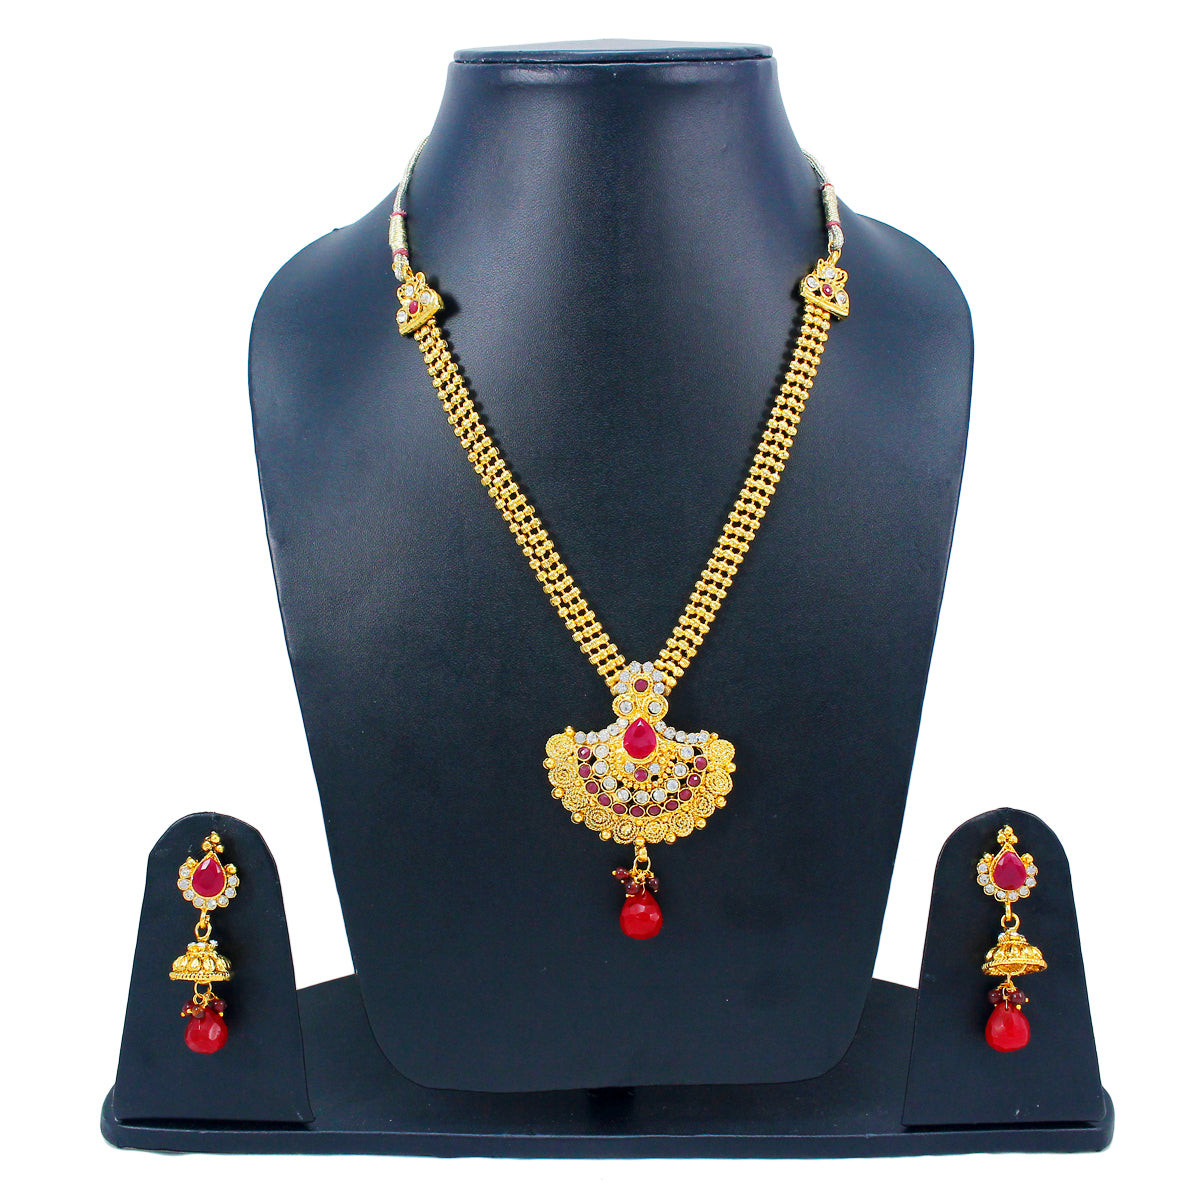 Royal Gold Plated Designer Kundan Stone Rani Har Design Necklace and  Jhumka Earrings with White  Red Stones and Pearl Chain